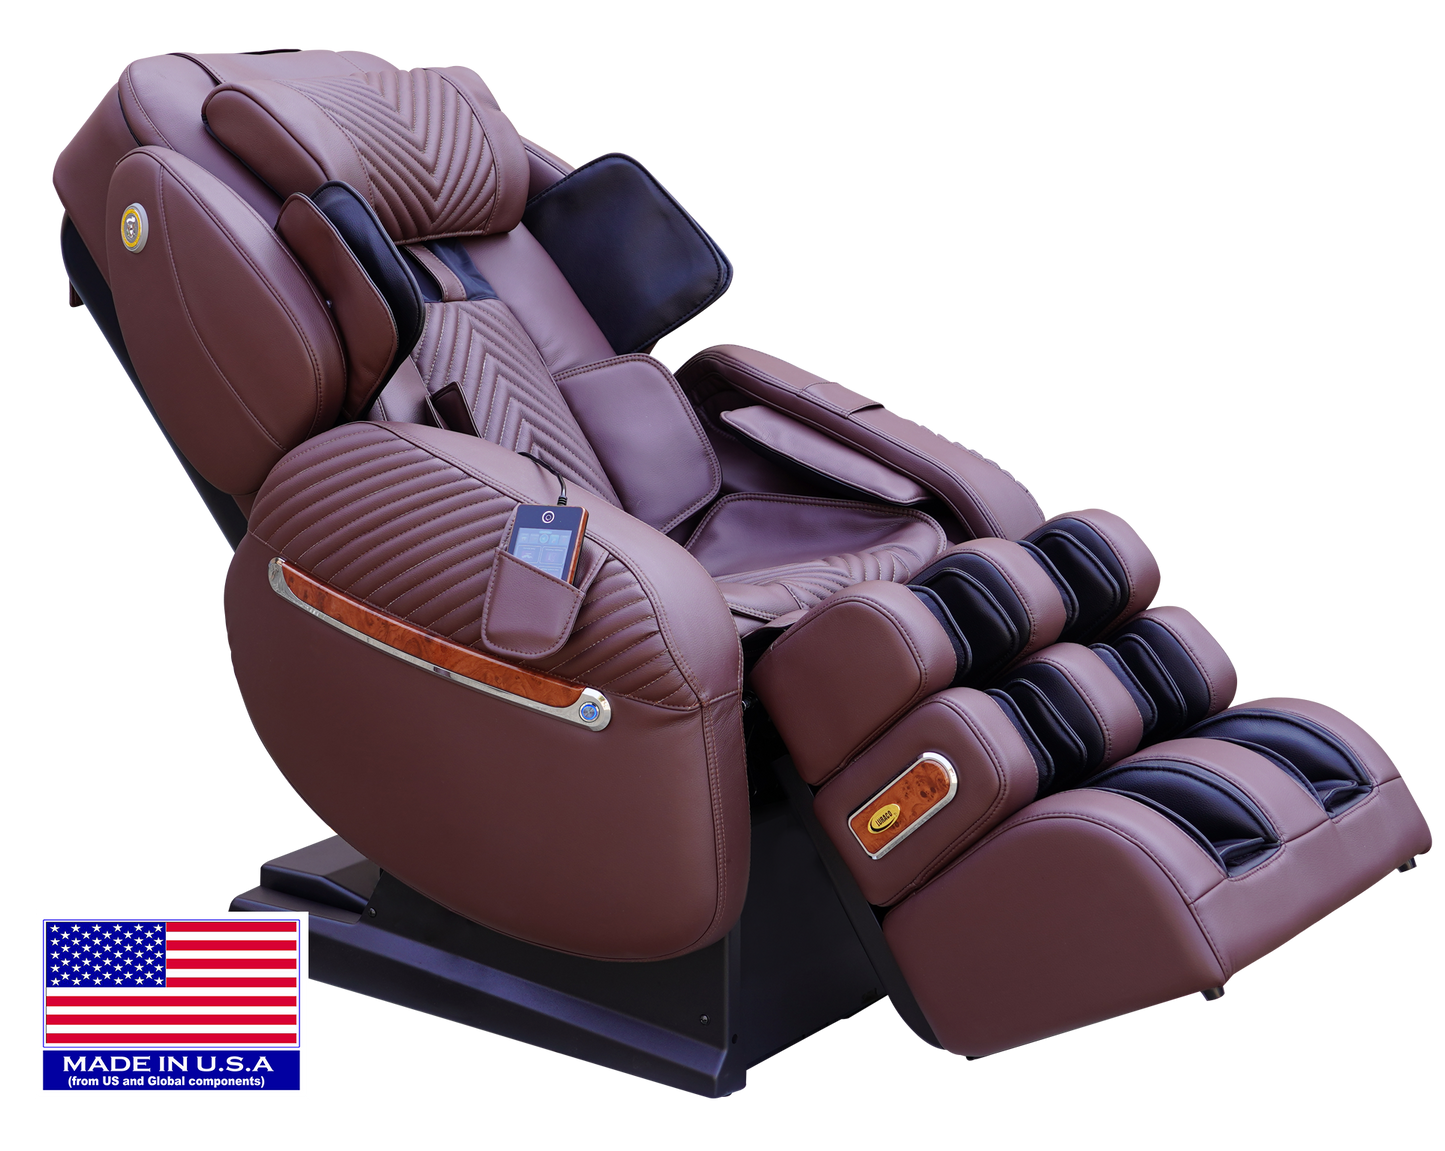 Luraco i9 MAX SPECIAL EDITION Massage Chair | MOTHER'S DAY SALE PRICE